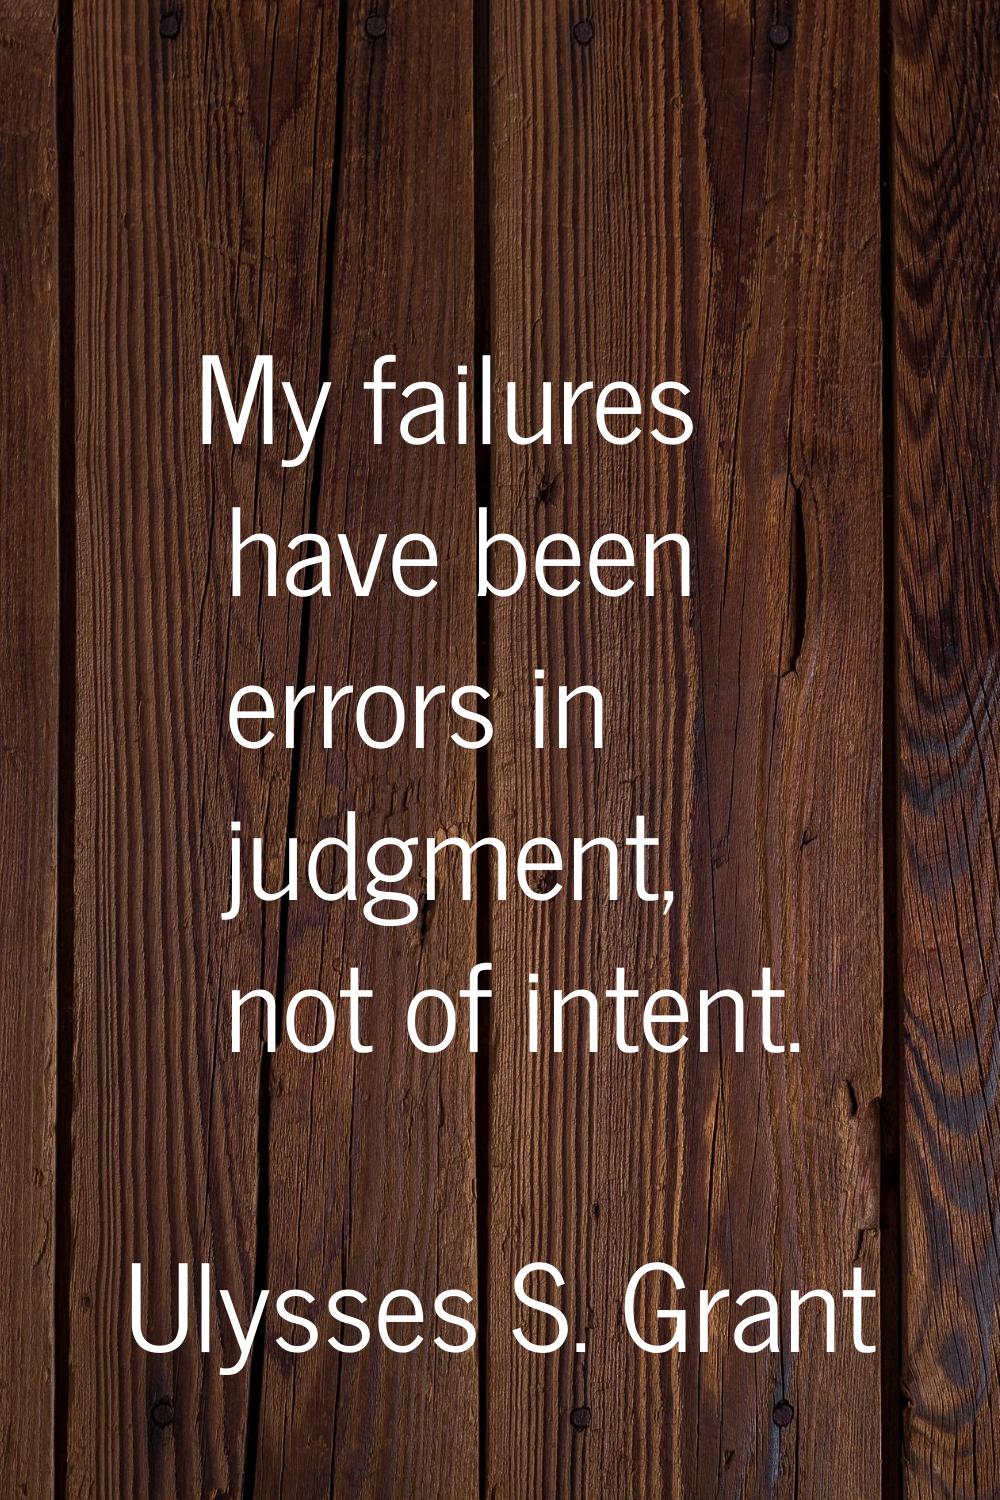 My failures have been errors in judgment, not of intent.